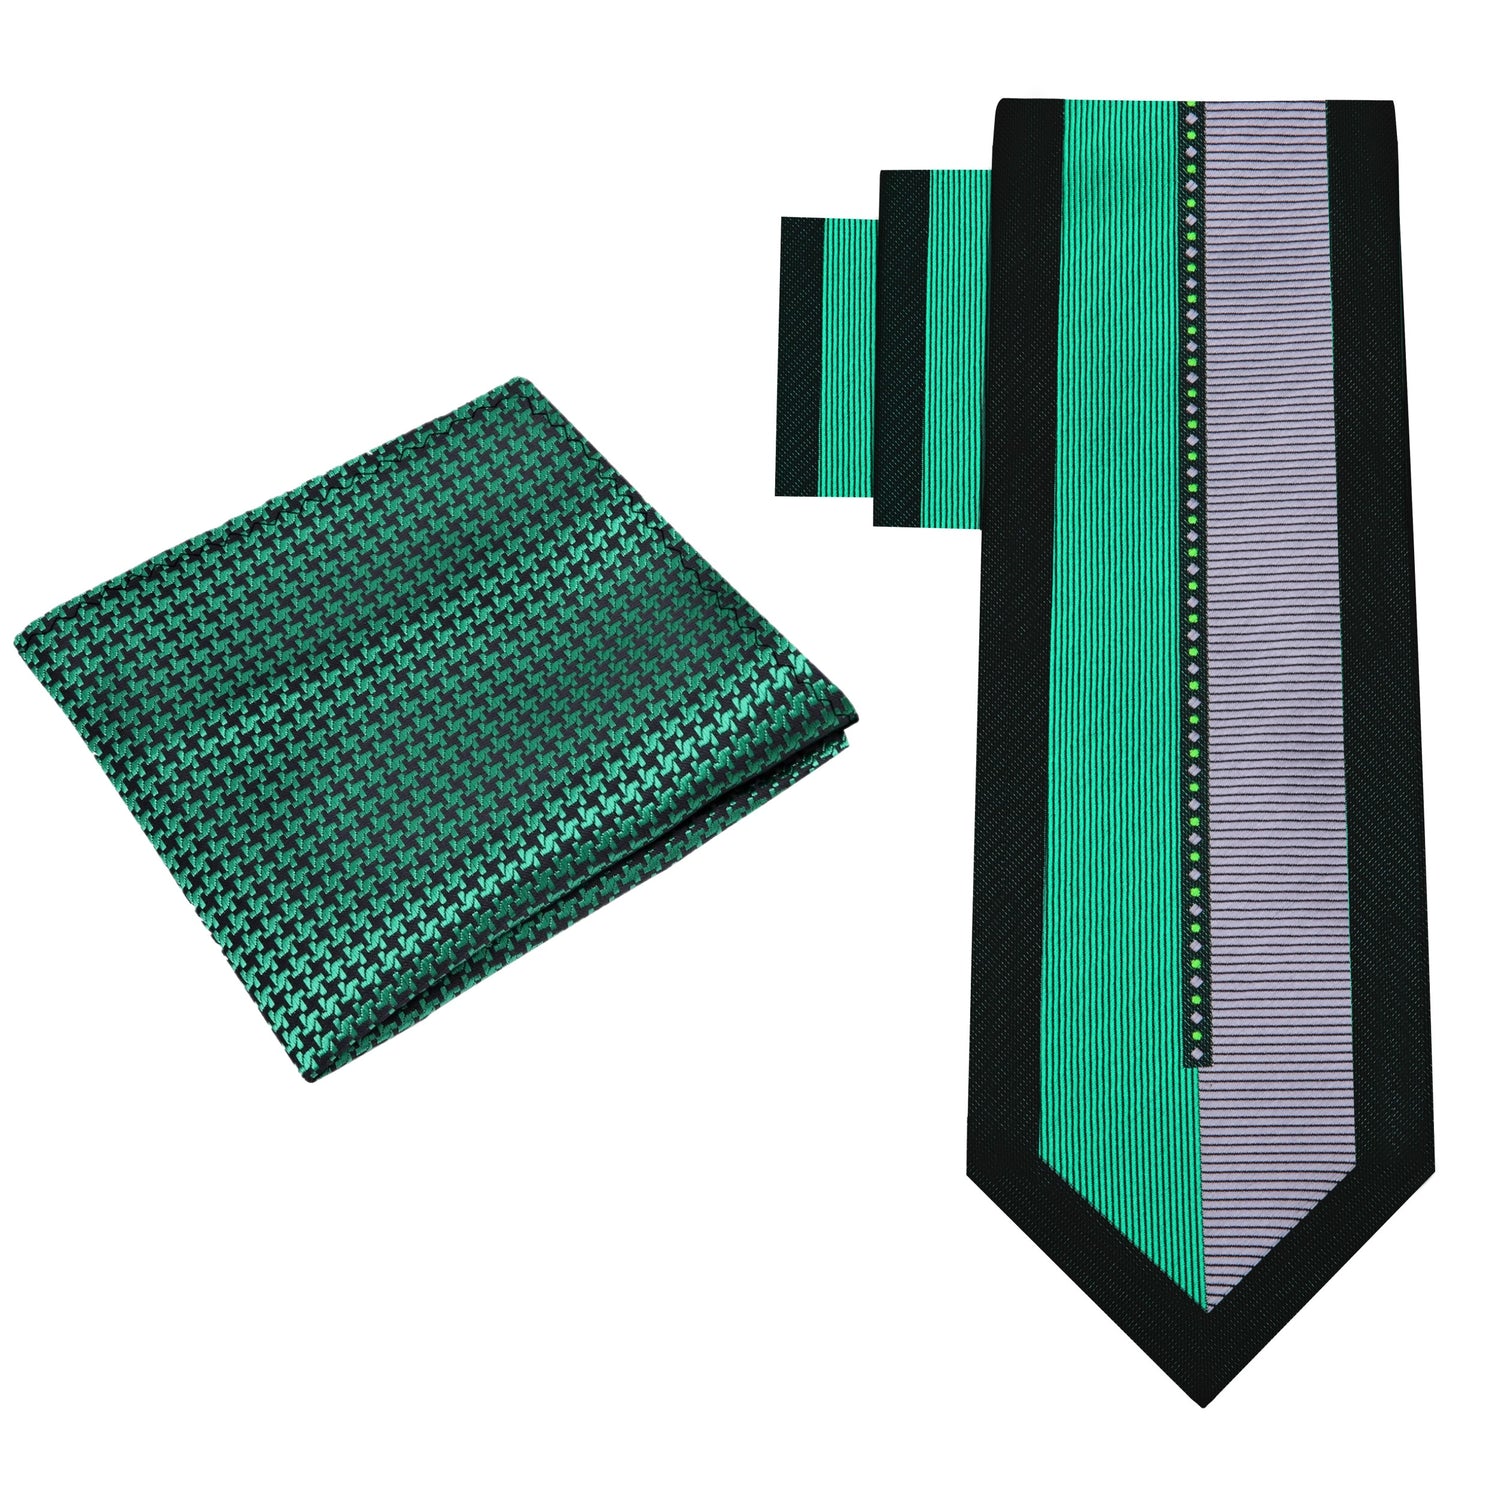 Alt View: Black, Green, Grey Abstract Tie with Green, Black Hounds Tooth Pocket Square